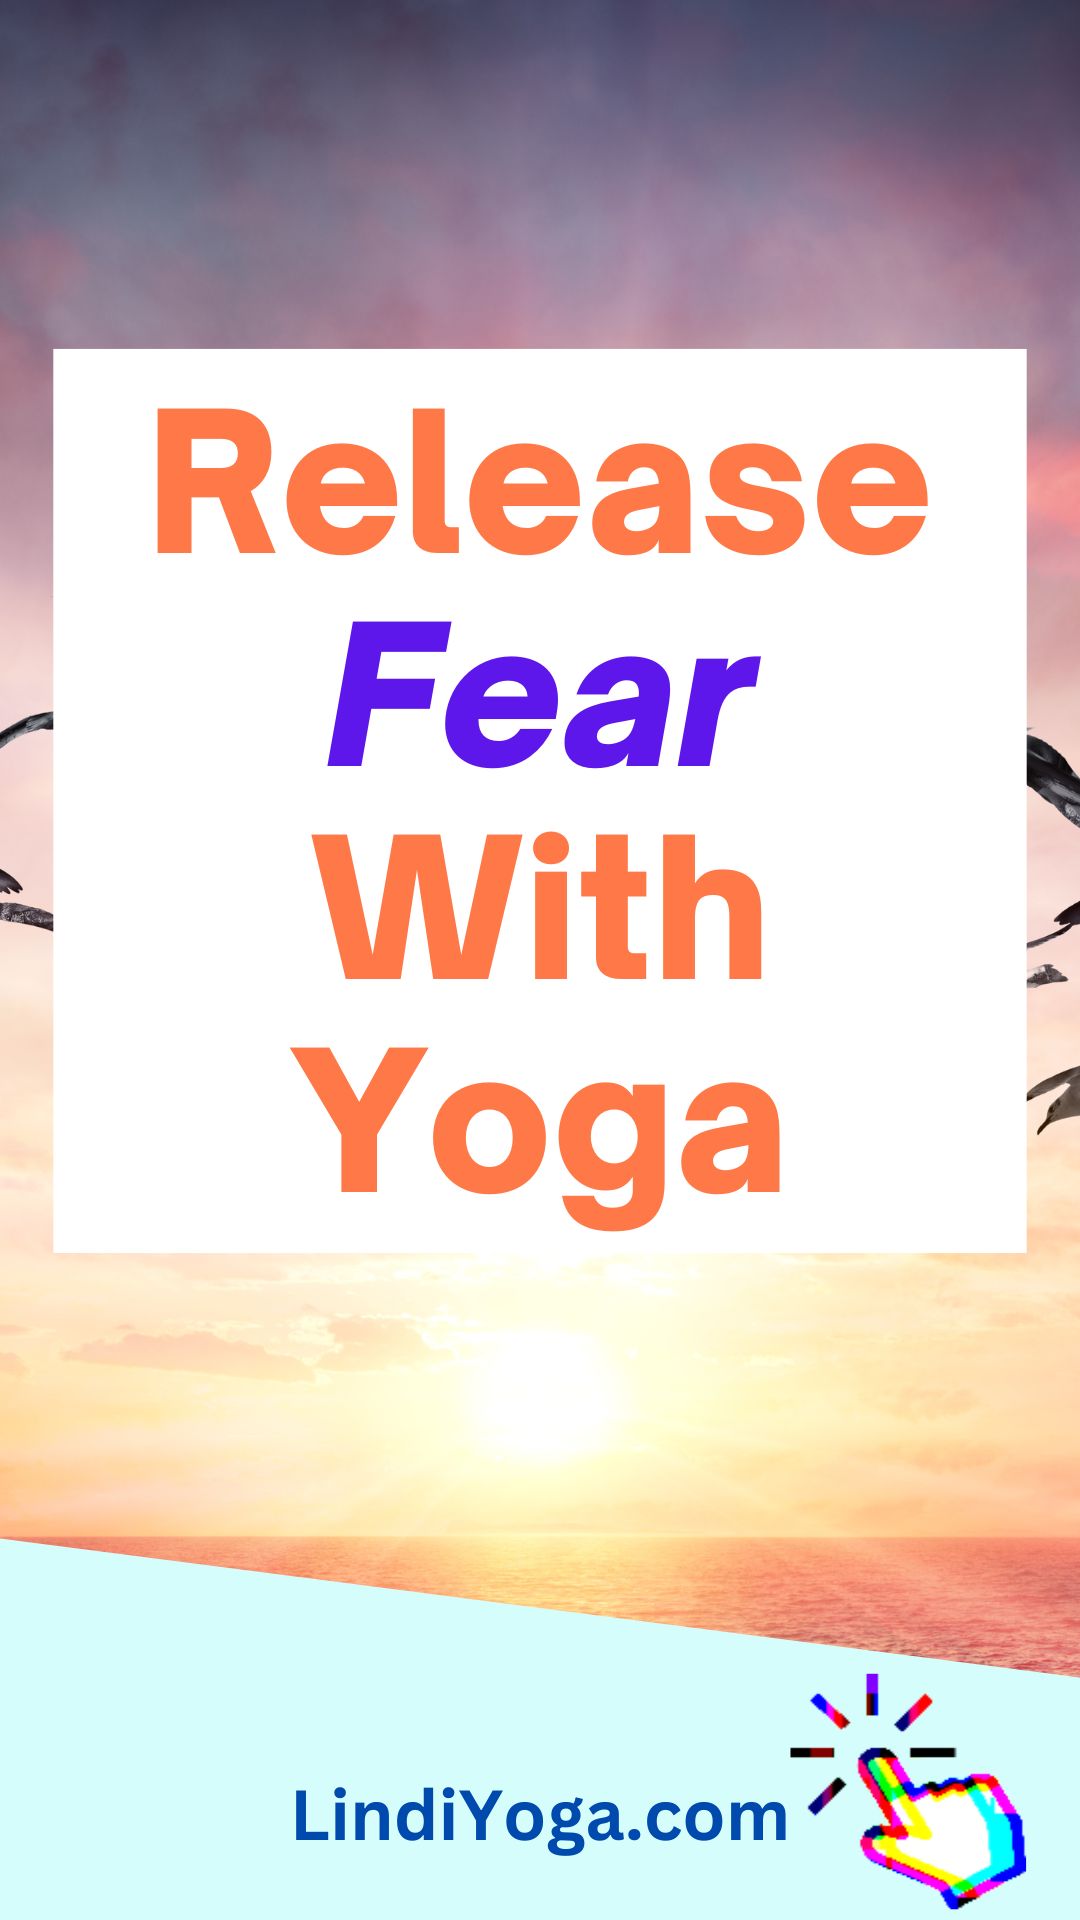 Release Fear With Yoga / Canva